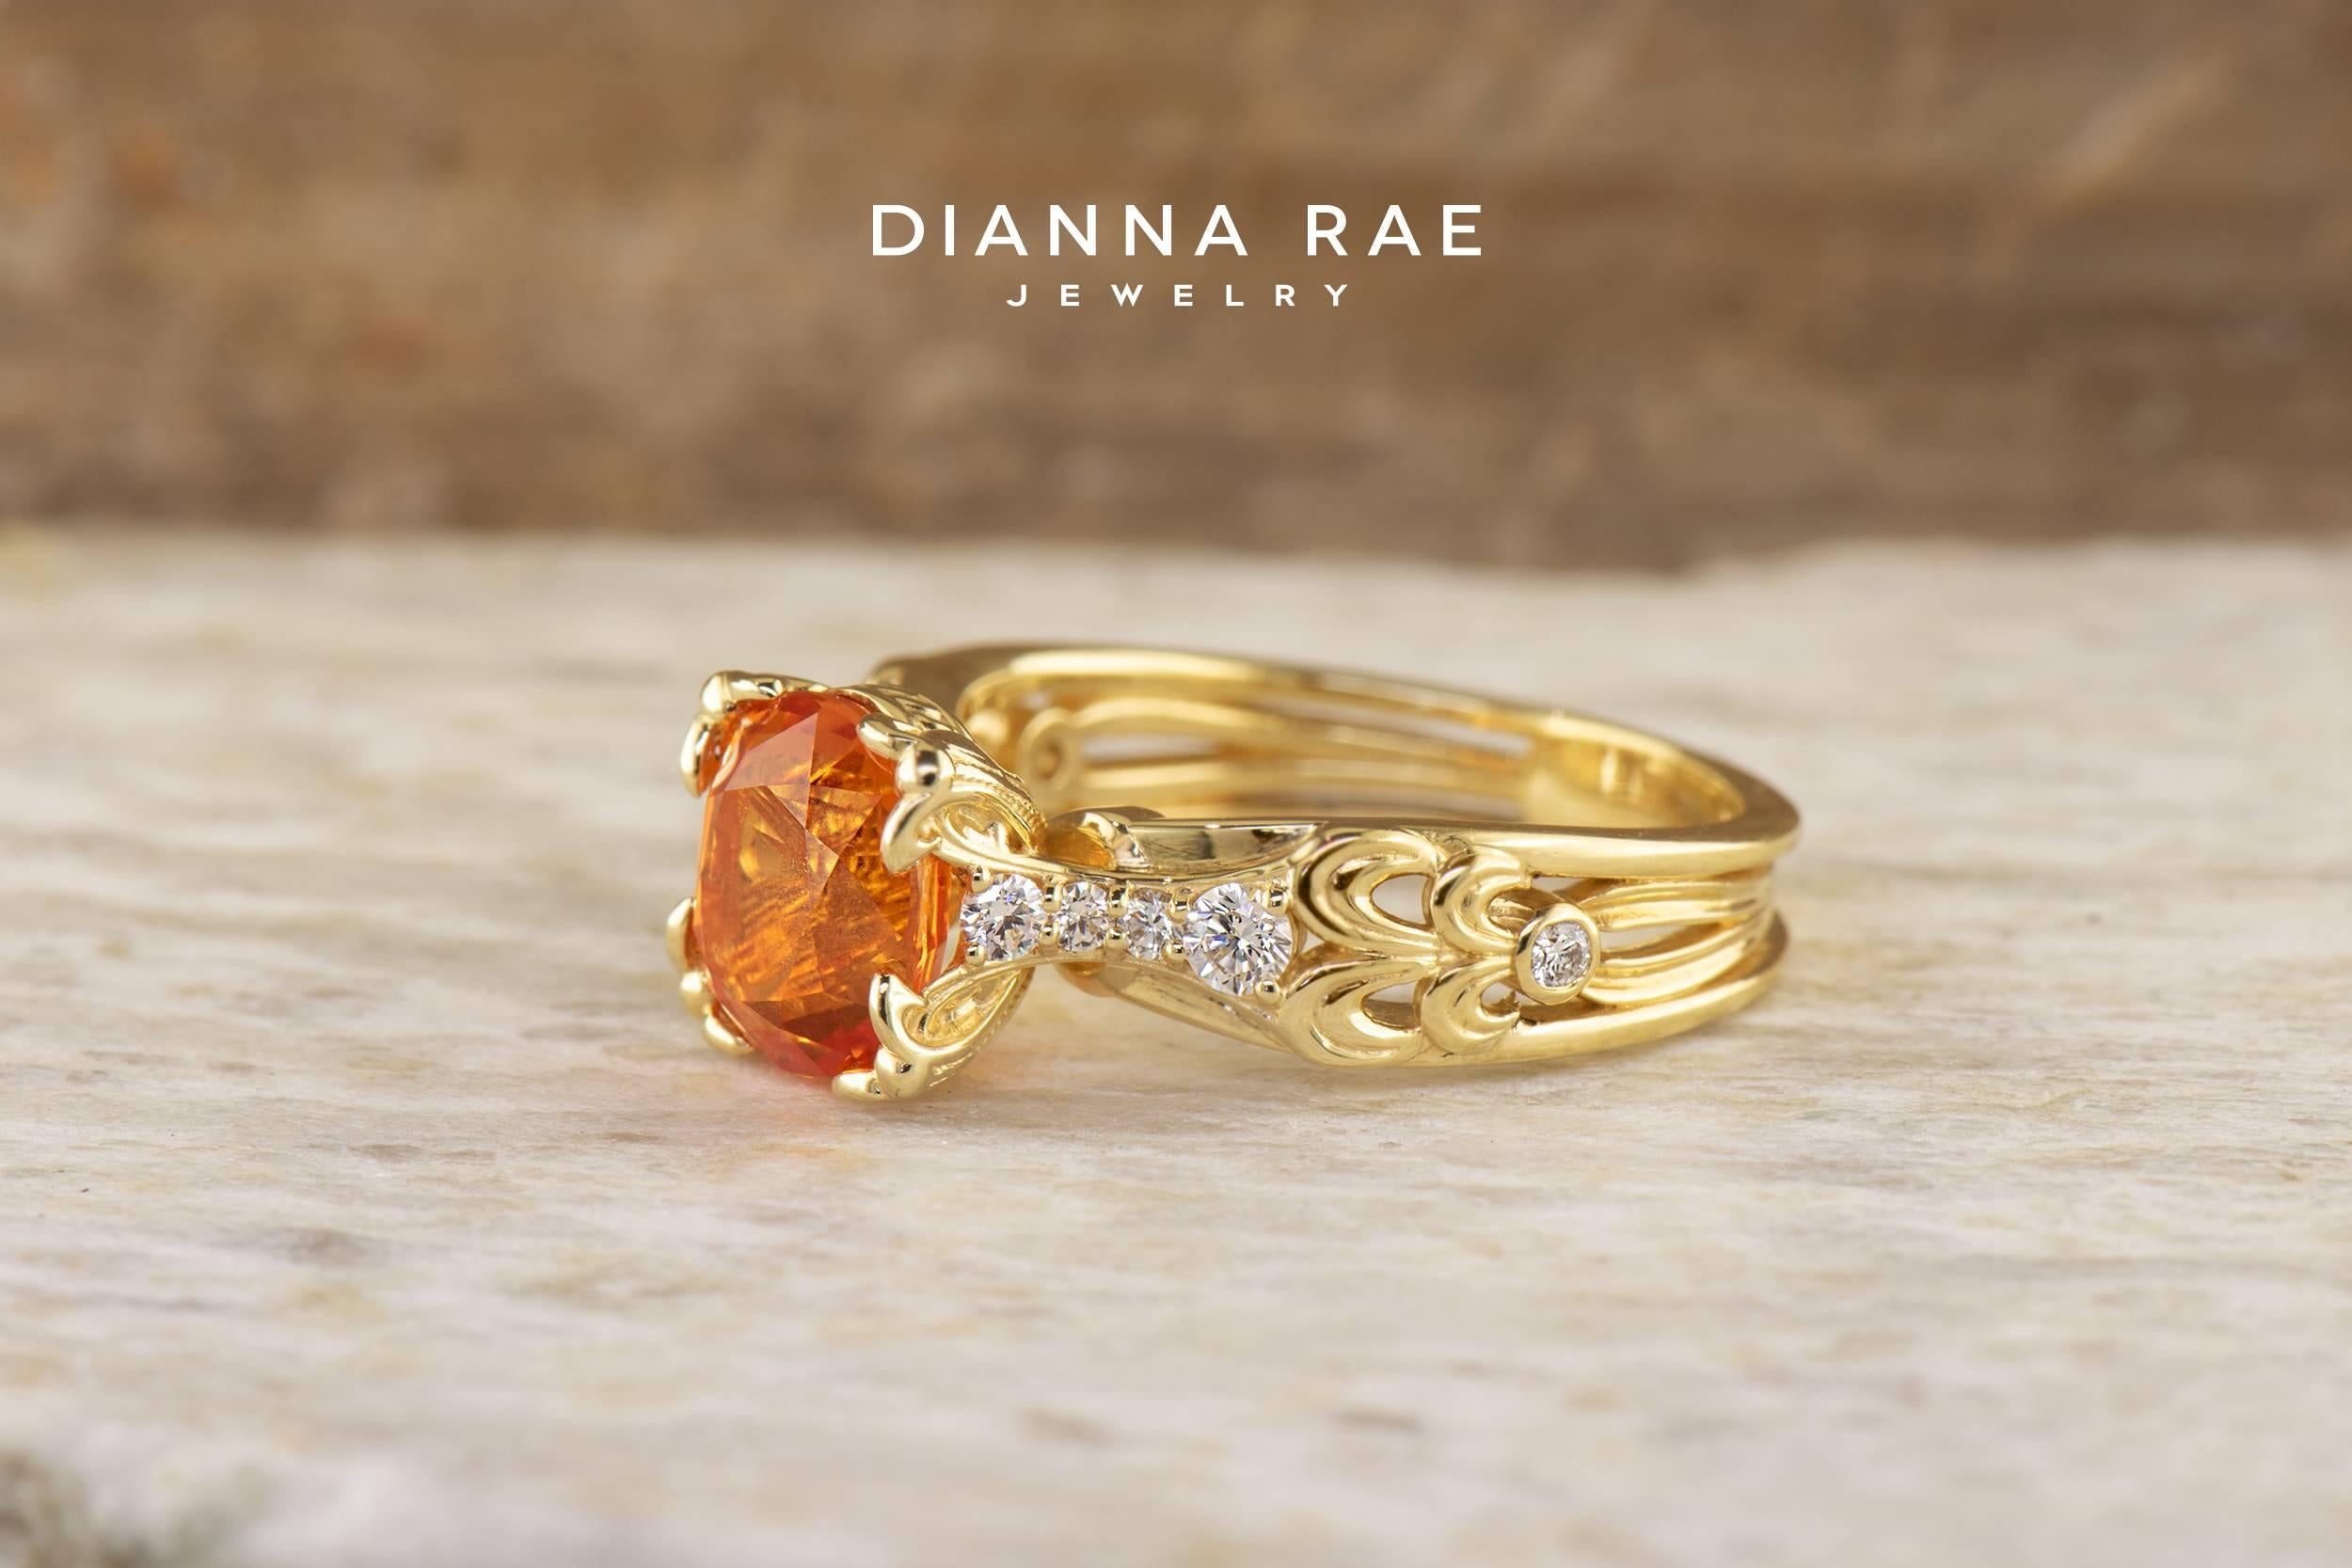 This floral and vintage inspired 18k Yellow Gold Ring features a vivid oval Orange Sapphire with diamond accents.  

Set with a 3.16 carat genuine orange sapphire and 10=0.20Tw Round G Si1 Diamonds.